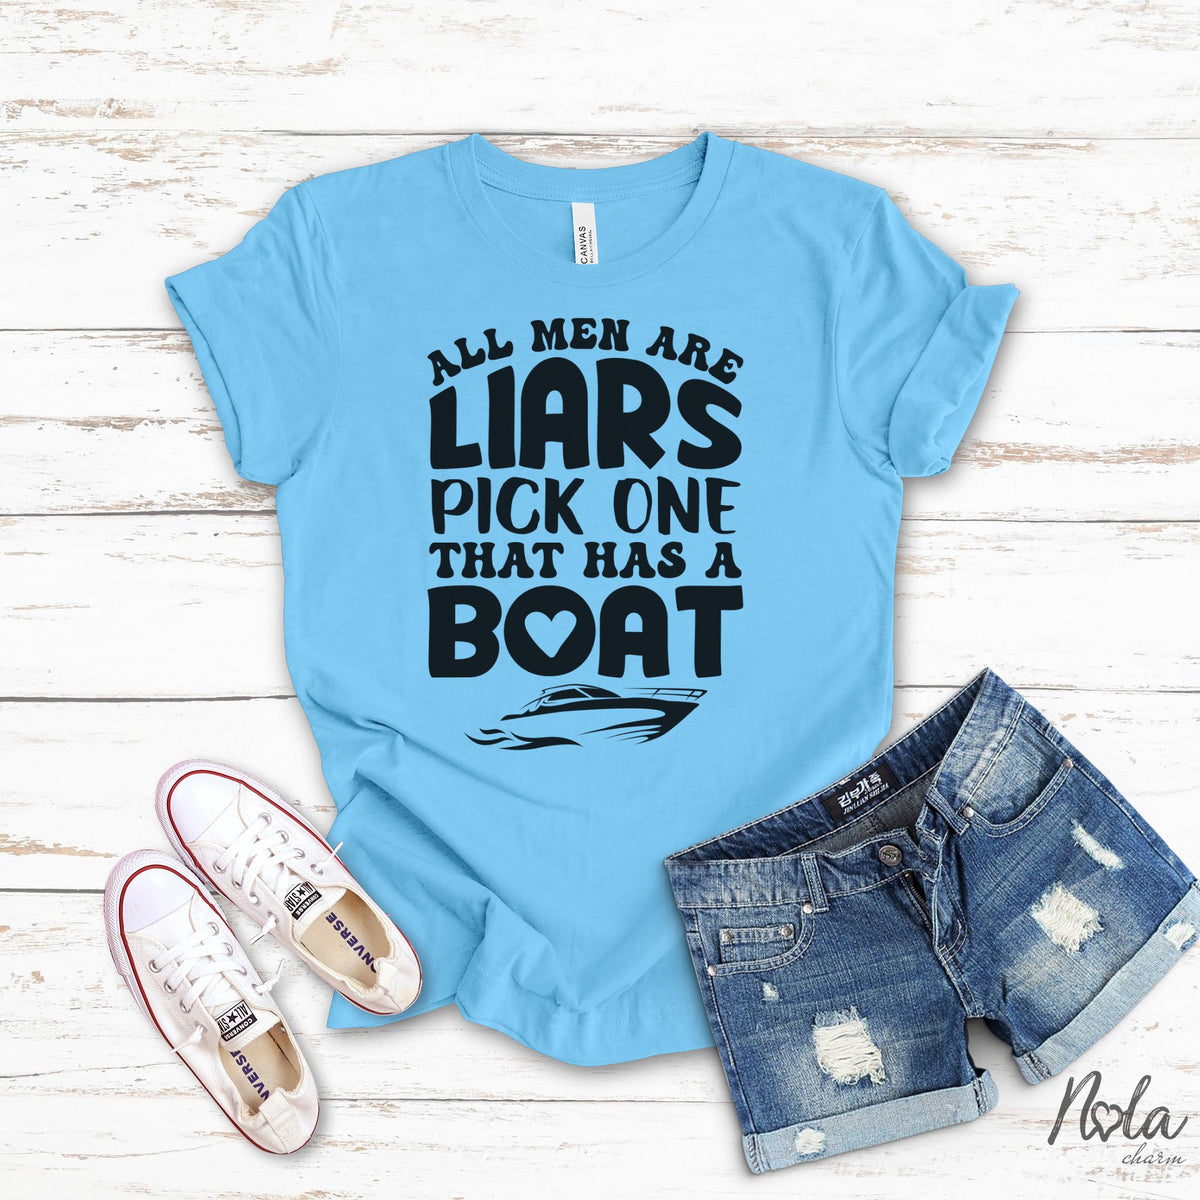 All Men Are Liars Pick One That Has A Boat - Nola Charm